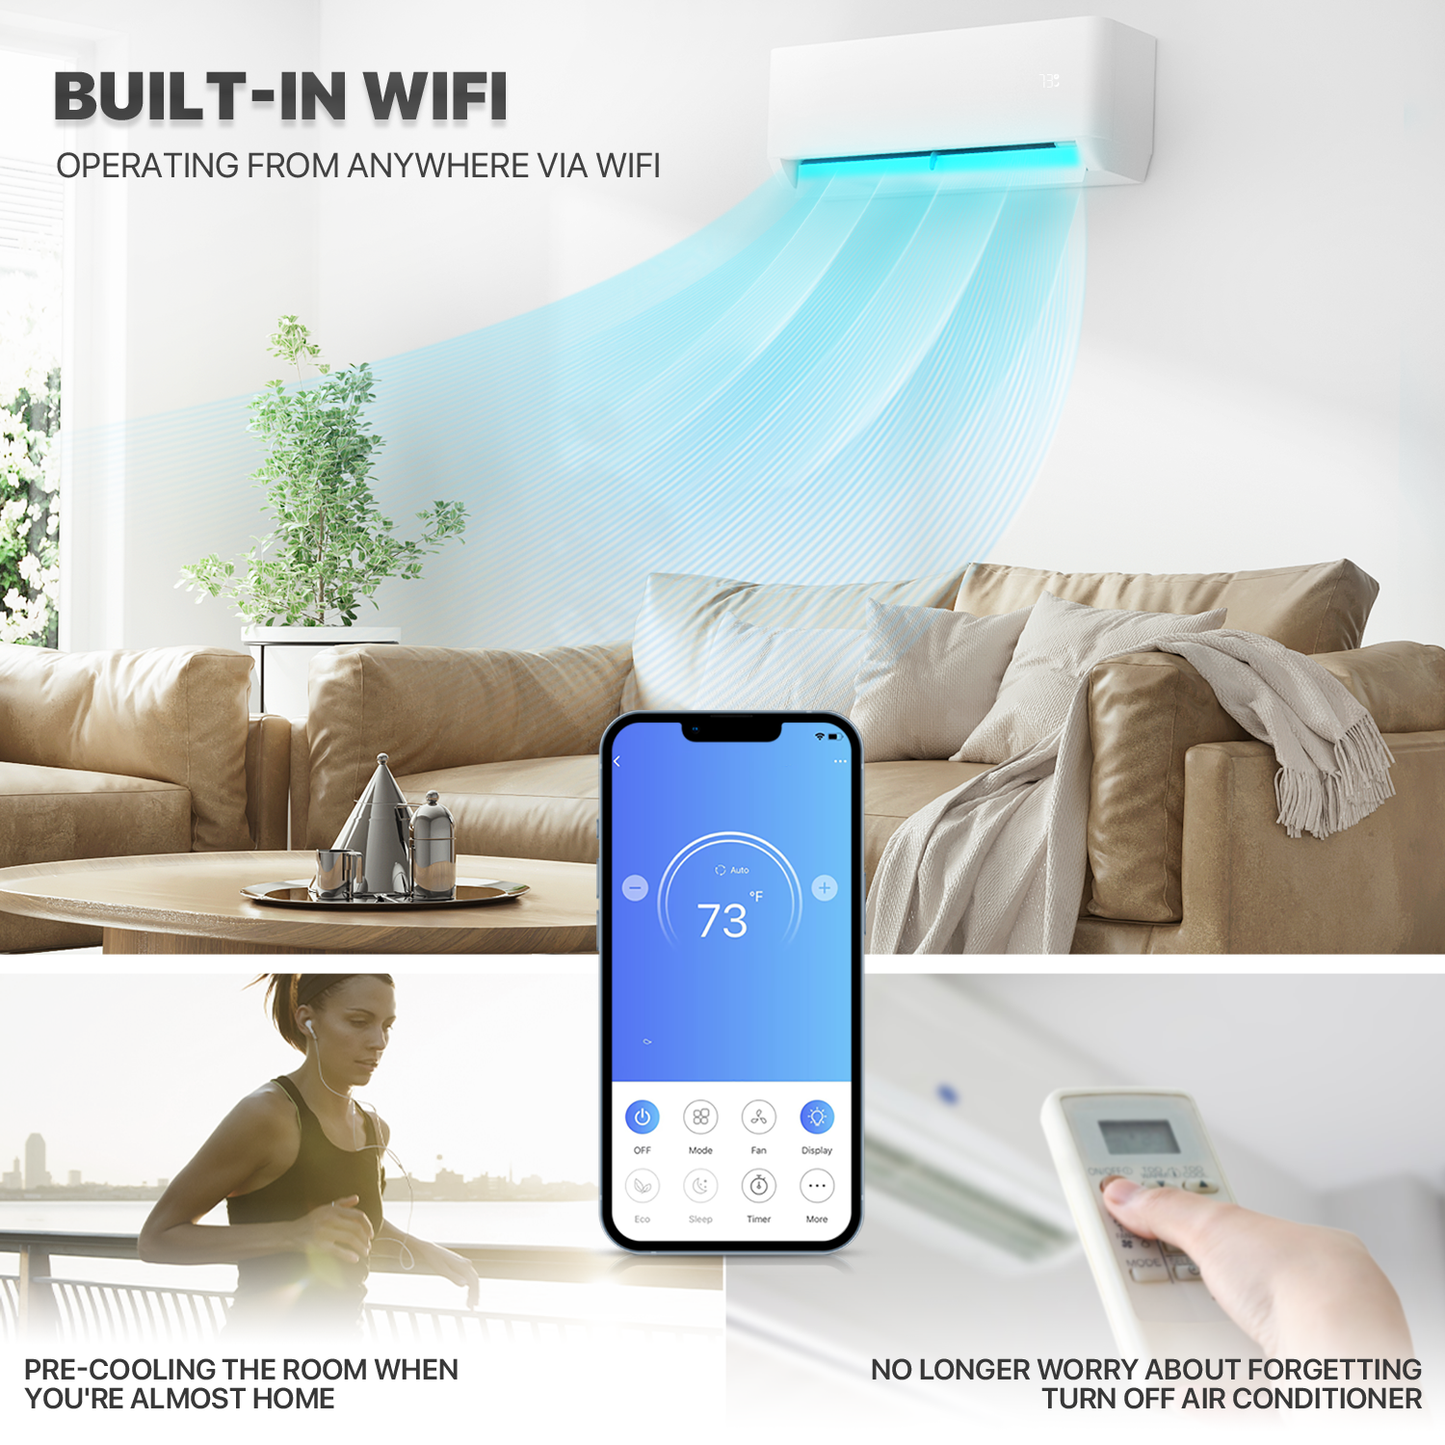 12000 BTU Split Air Conditioner - Cooling & Heating Function- WIFI APP Control - 4-in-1 filter